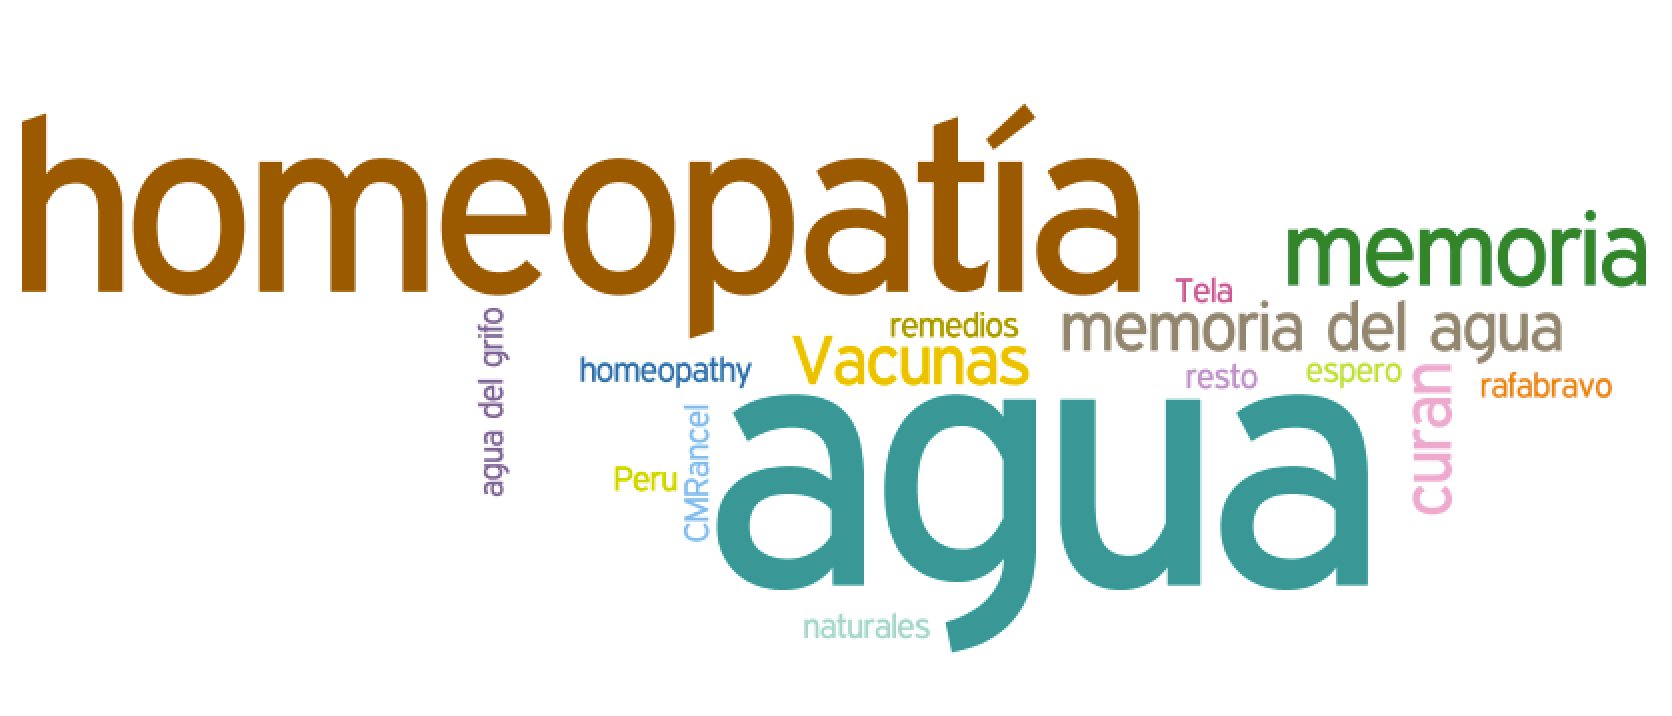 Topic cloud indicating that water is the most common word across all tweets. Much of the time, HCPs compared homeopathy’s efficacy to water.